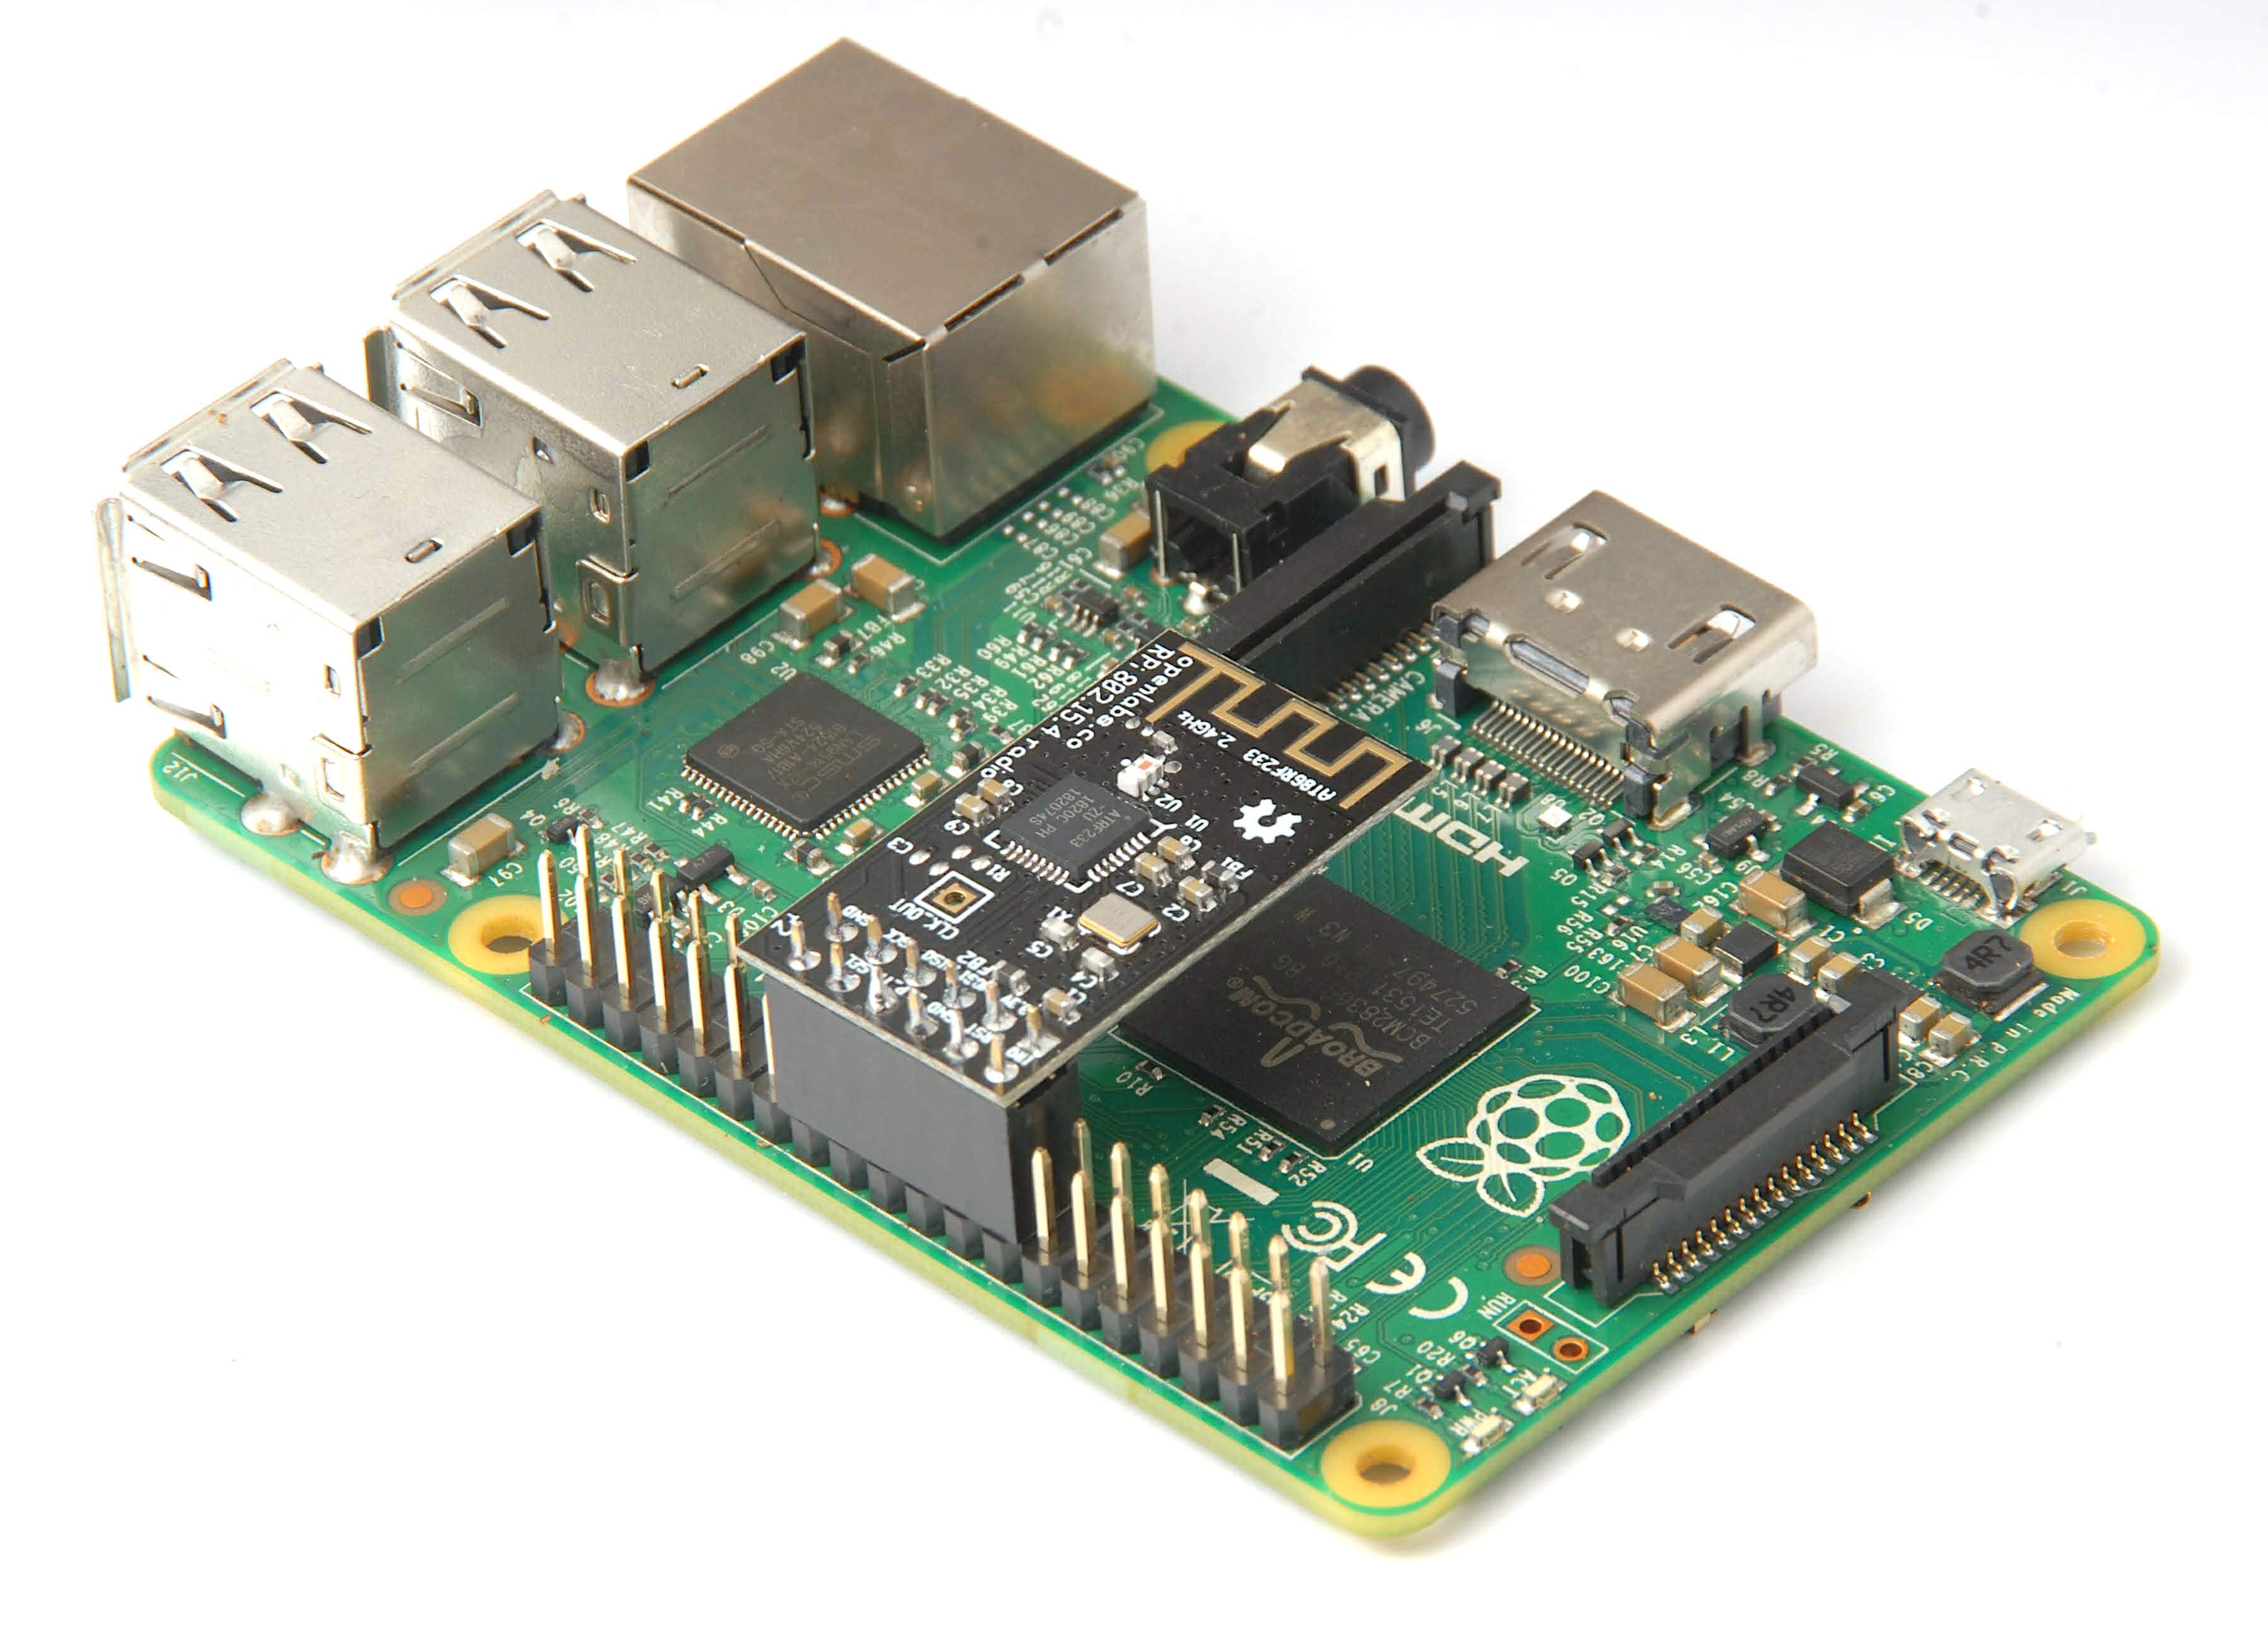 Connected to Raspberry Pi